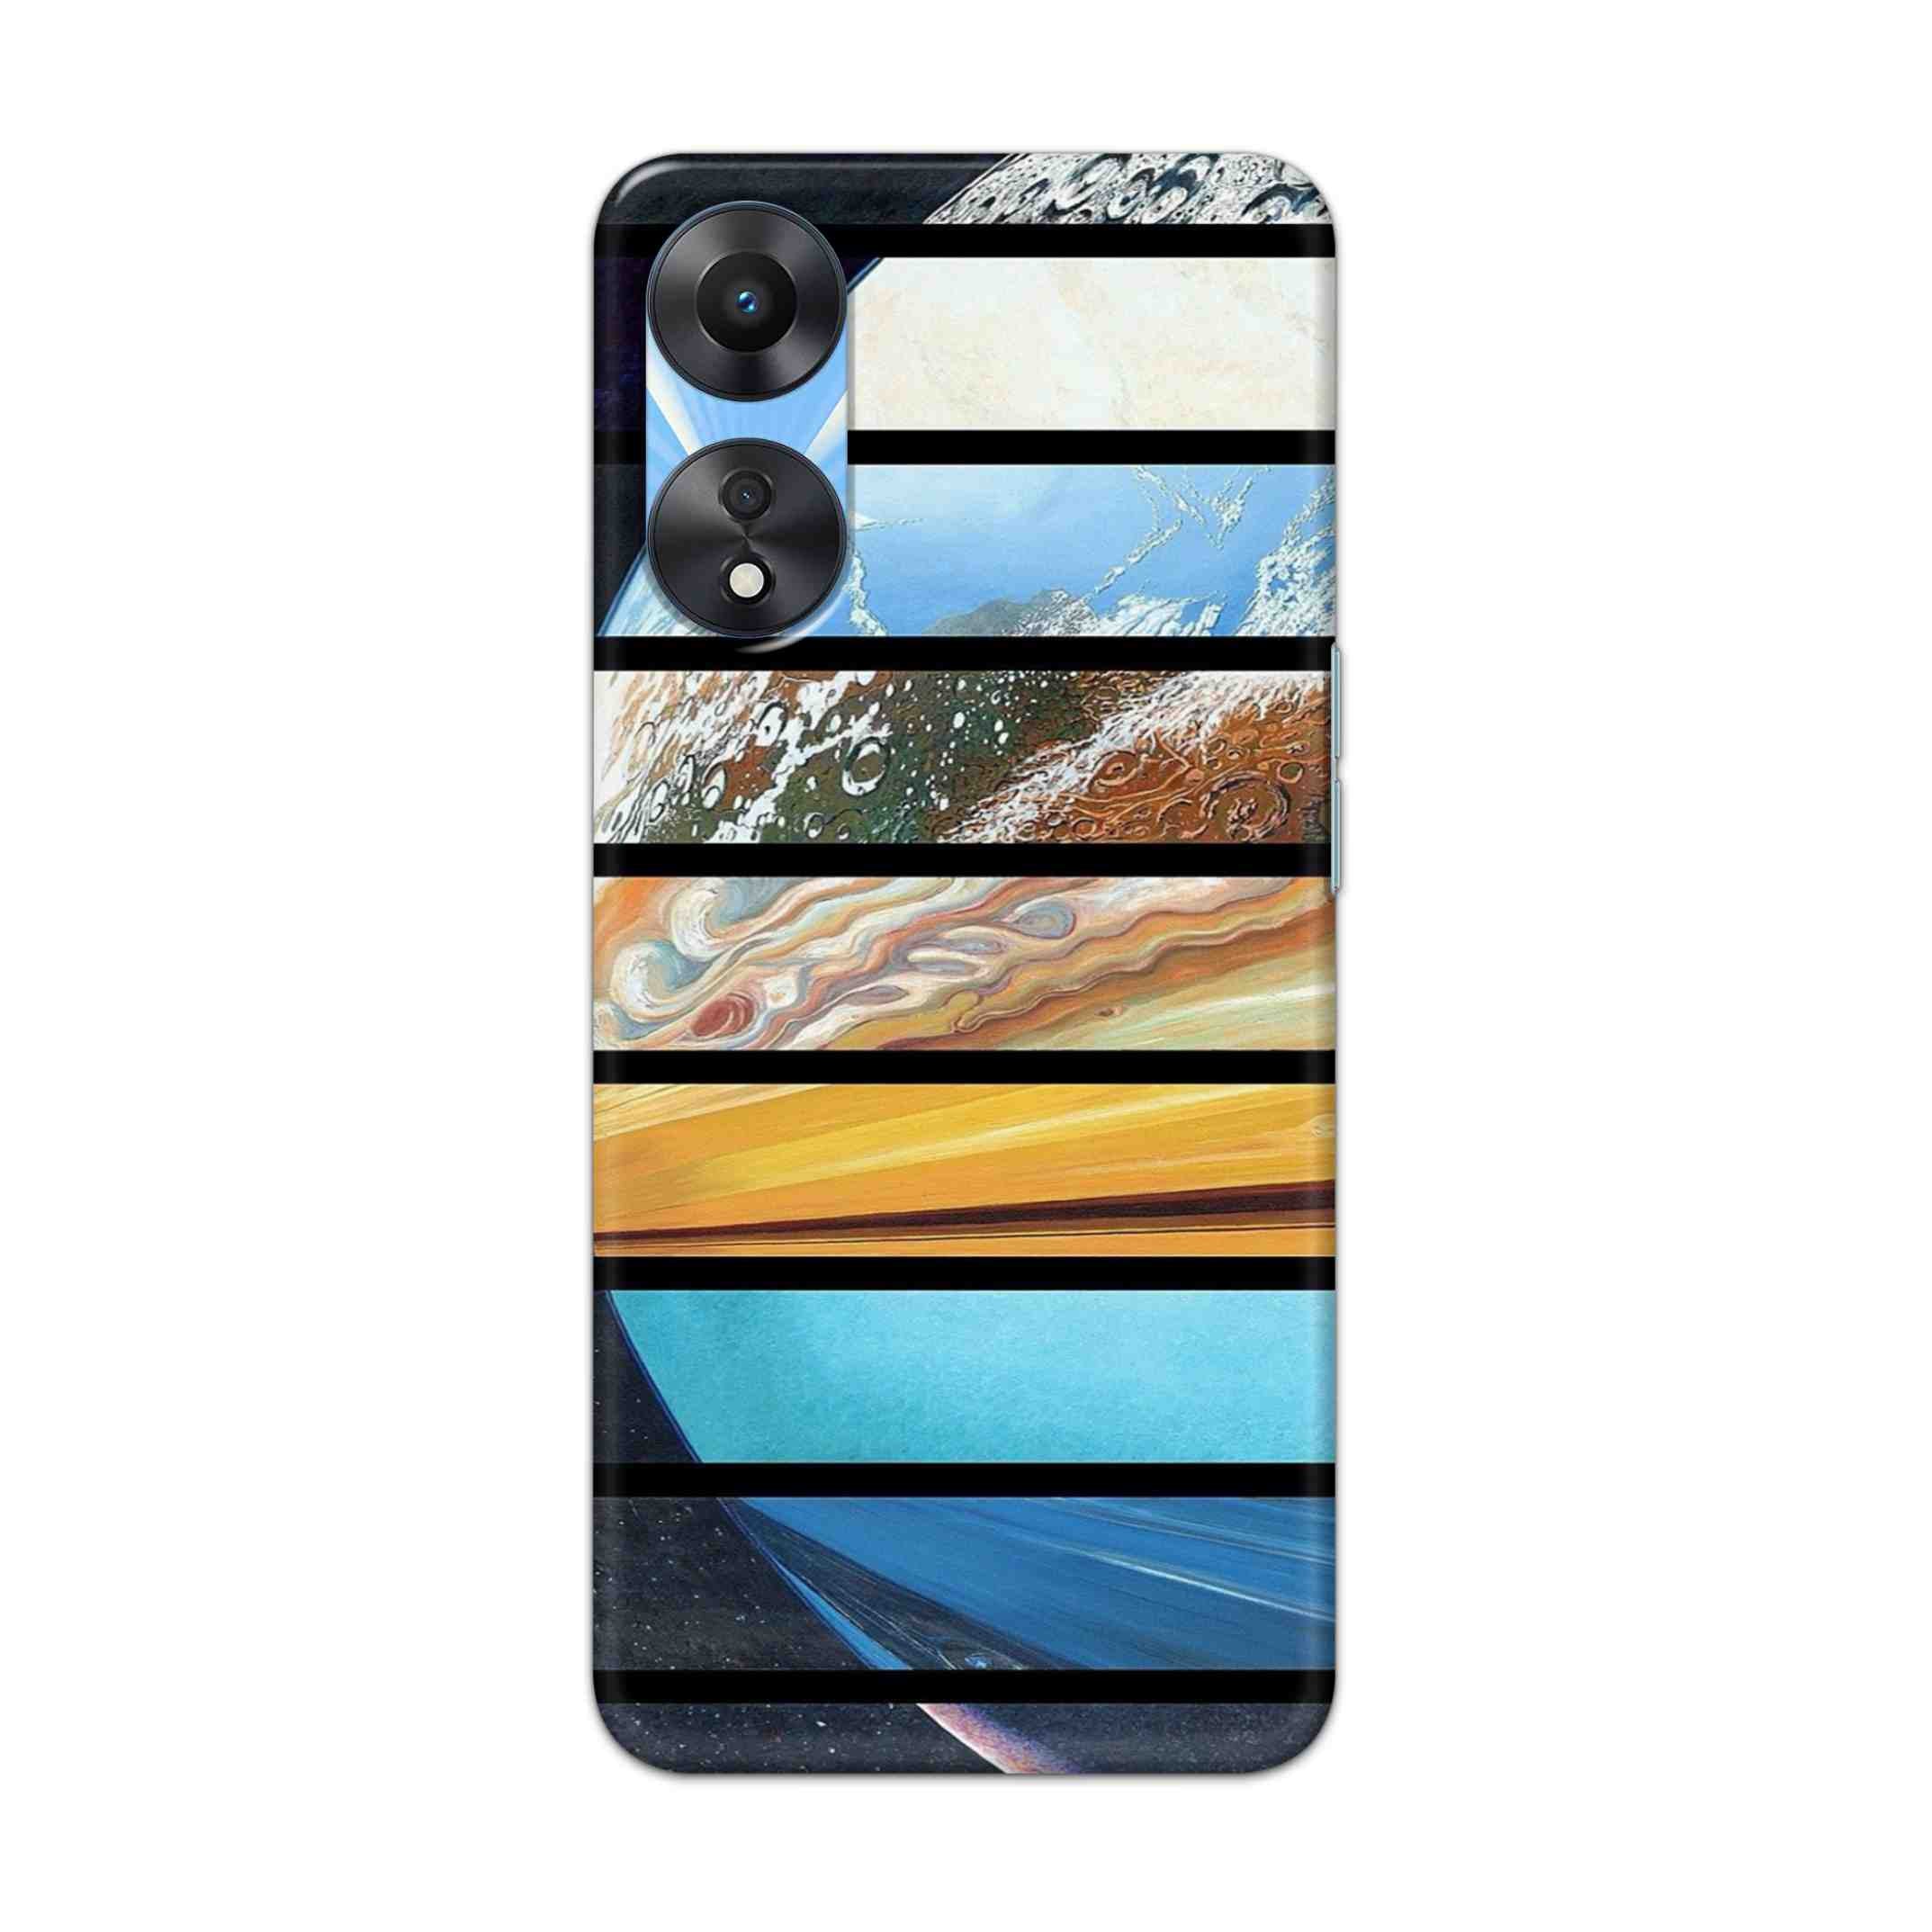 Buy Colourful Earth Hard Back Mobile Phone Case Cover For OPPO A78 Online